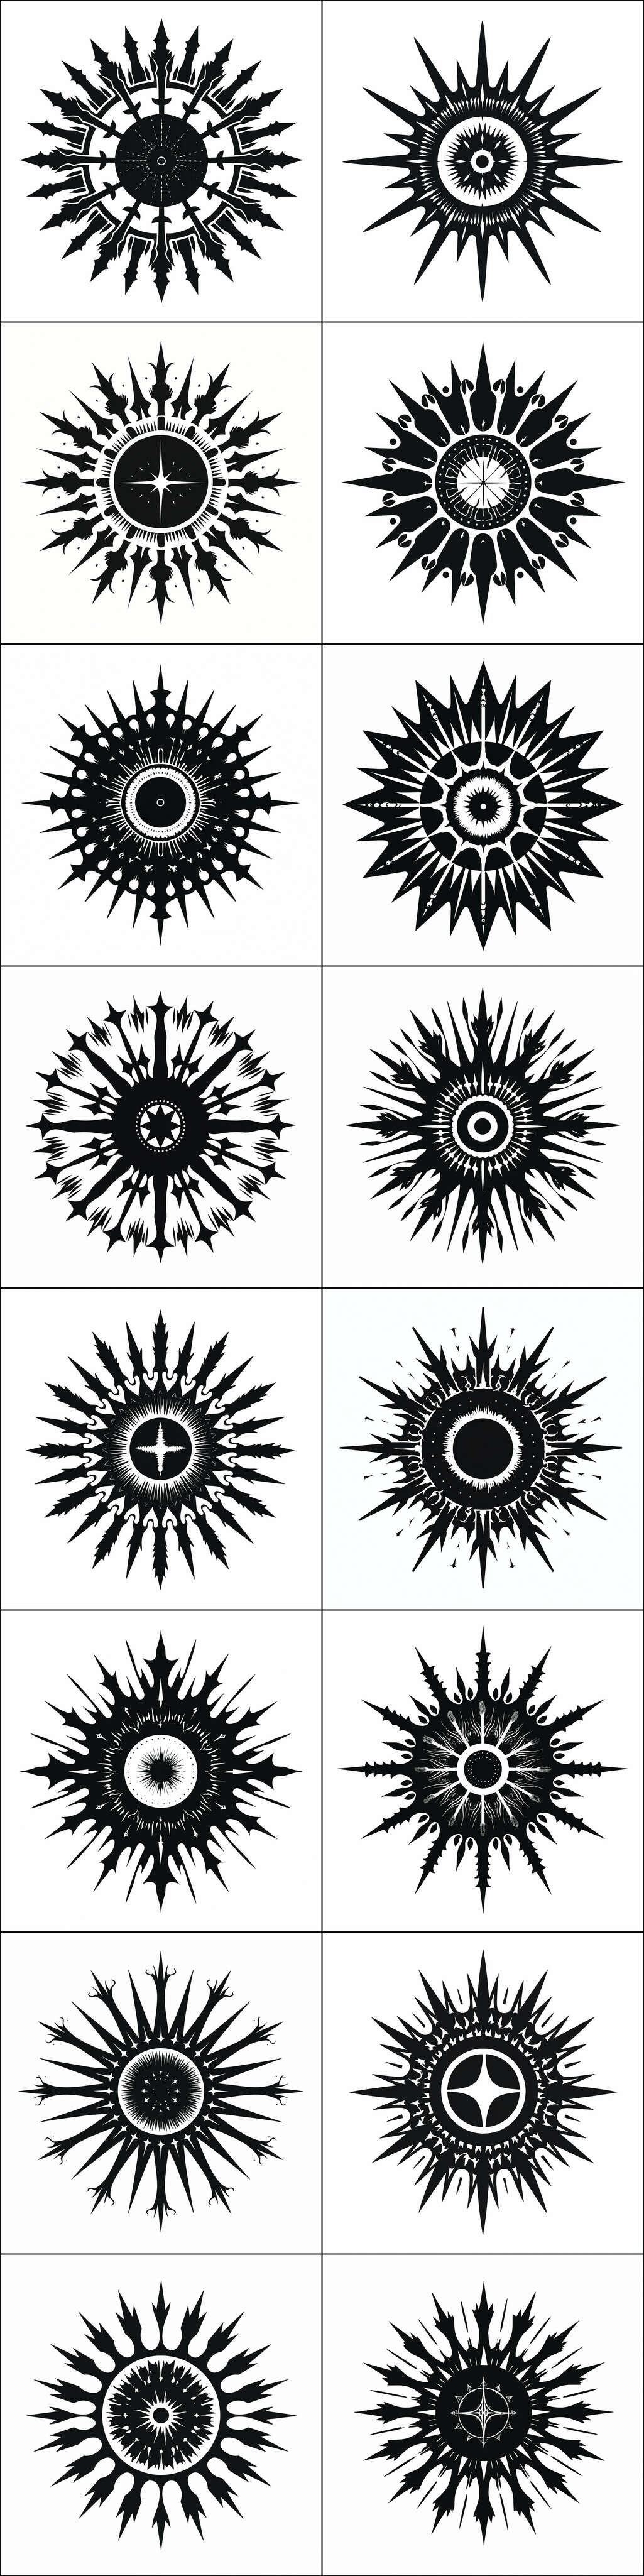 16 ‘black sun’ symmetrical starburst samples from a failed Gene Wolfe dropcap prompt.